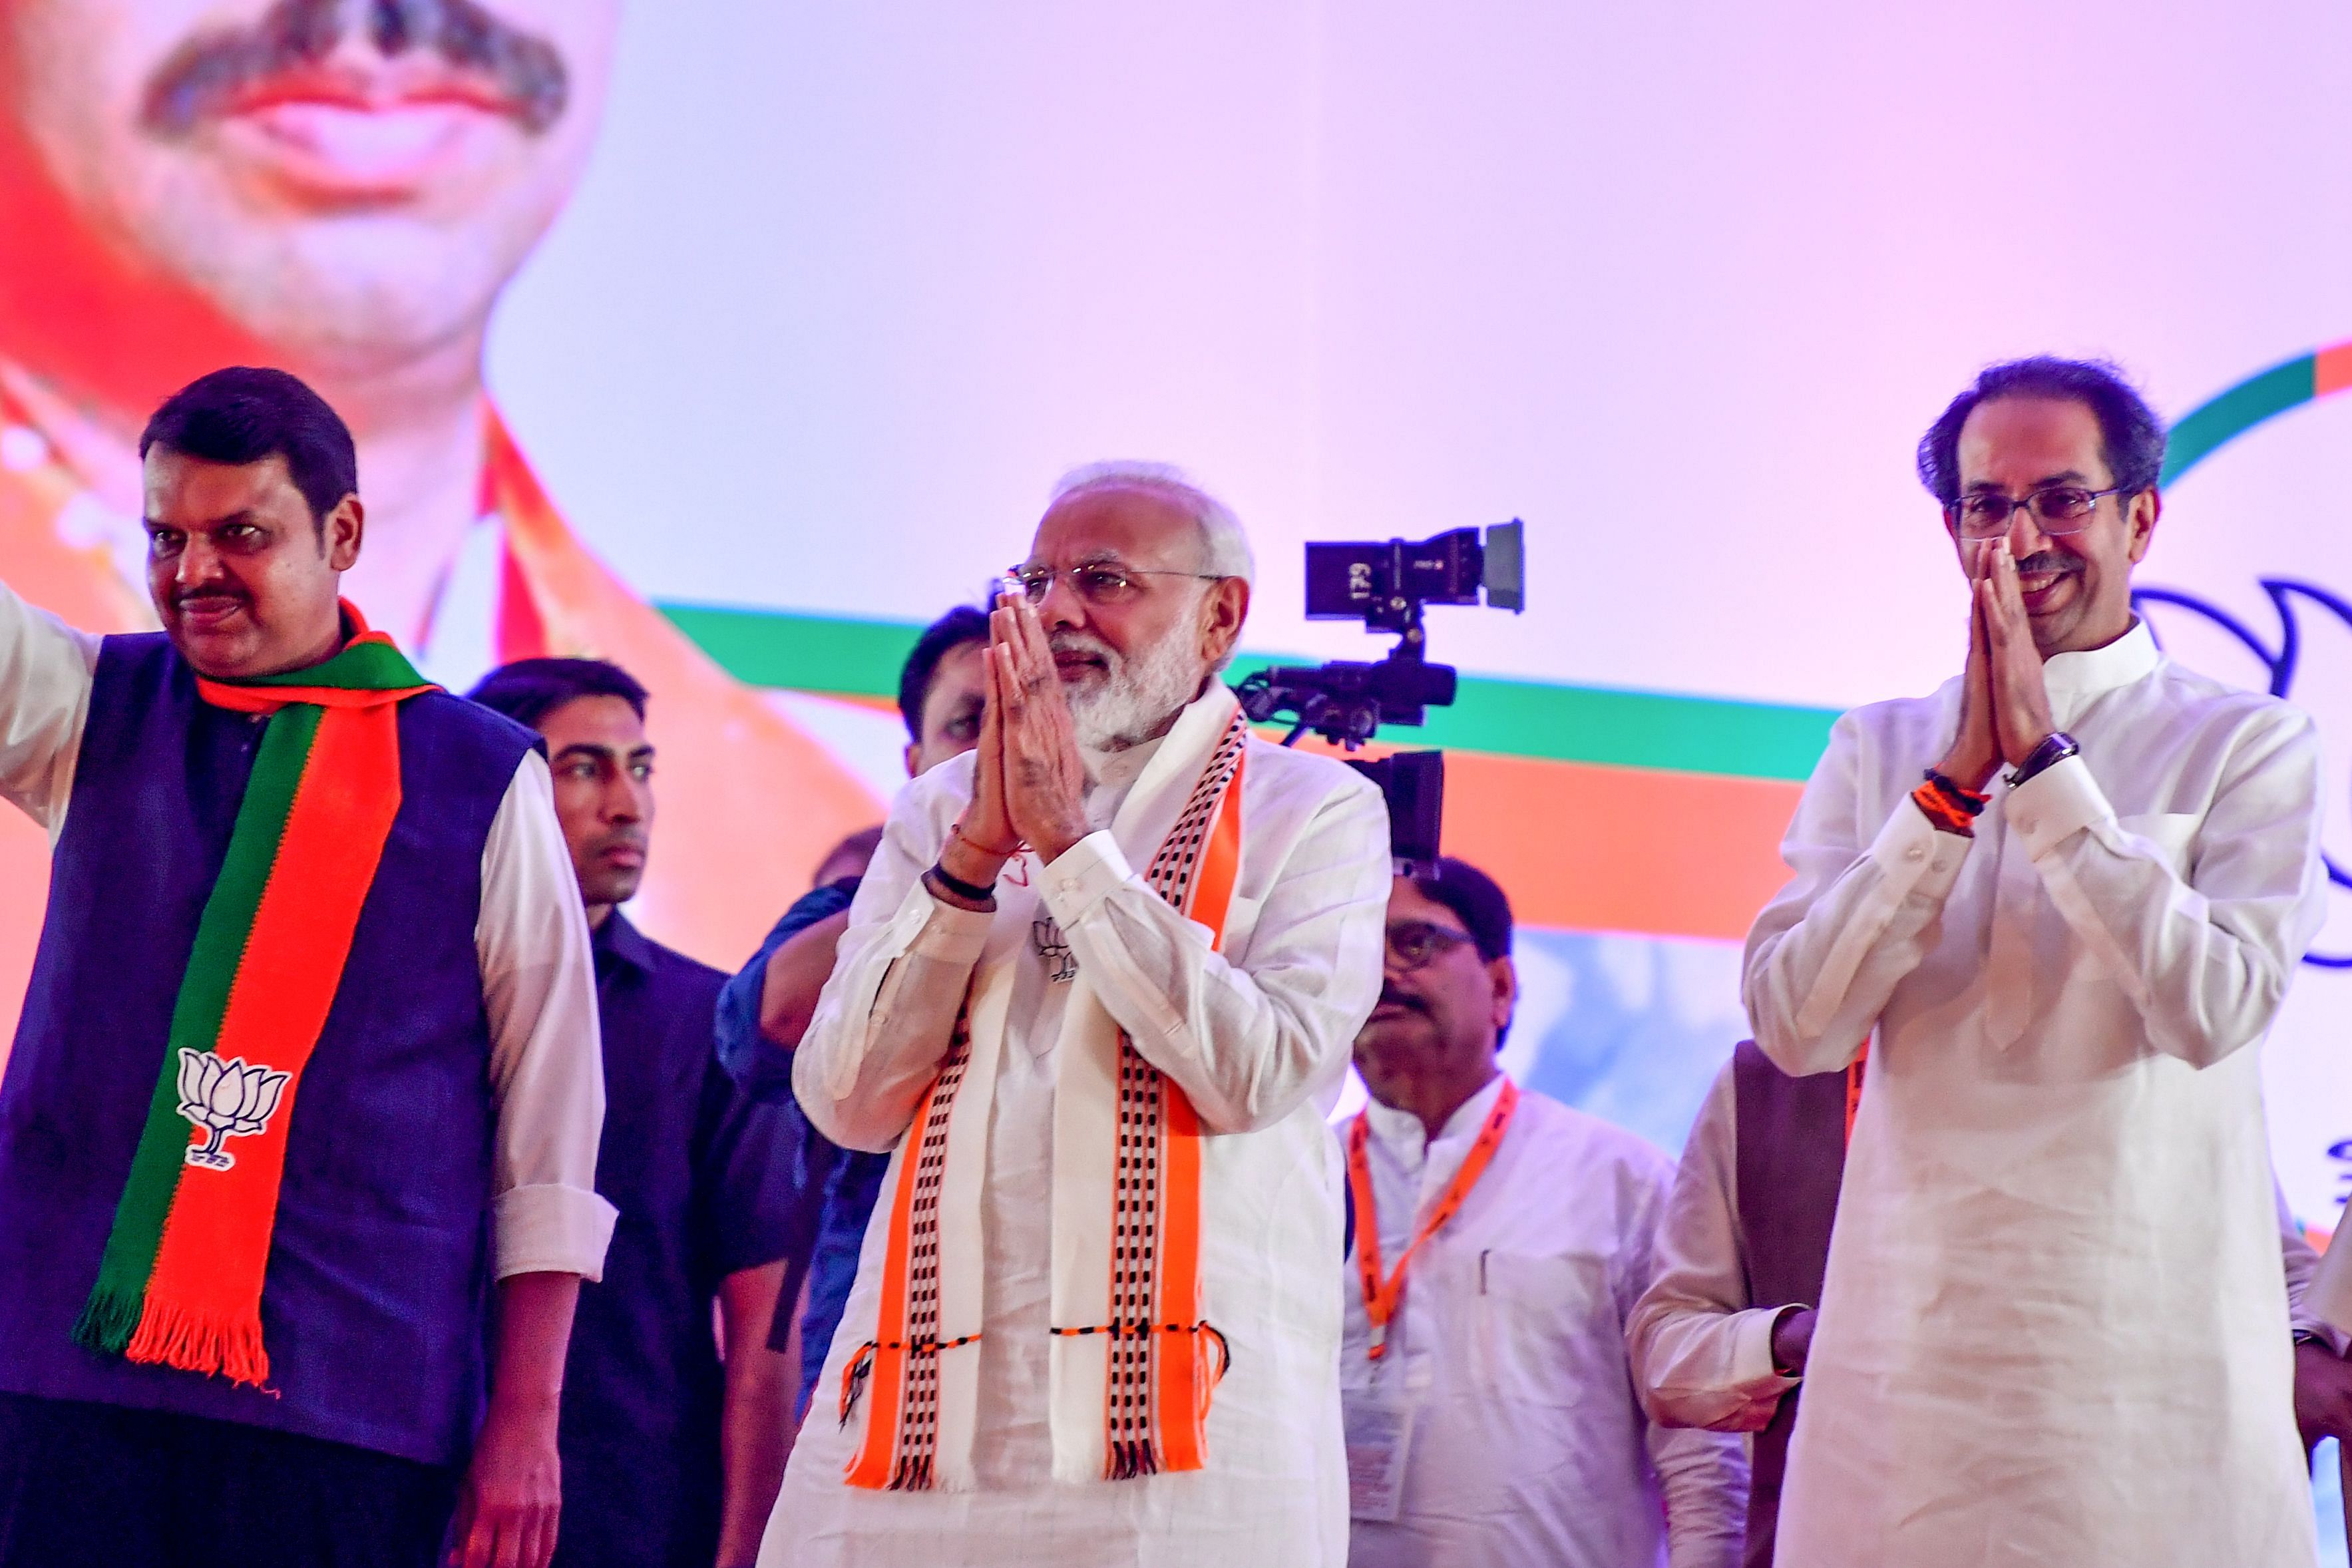 India's Prime Minister Narendra Modi (C) gestures along with Hindu right-wing party Shiv Sena Chief Uddhav Thackeray (R) and Chief Minister of the state Devendra Fadnavis. (AFP Photo)